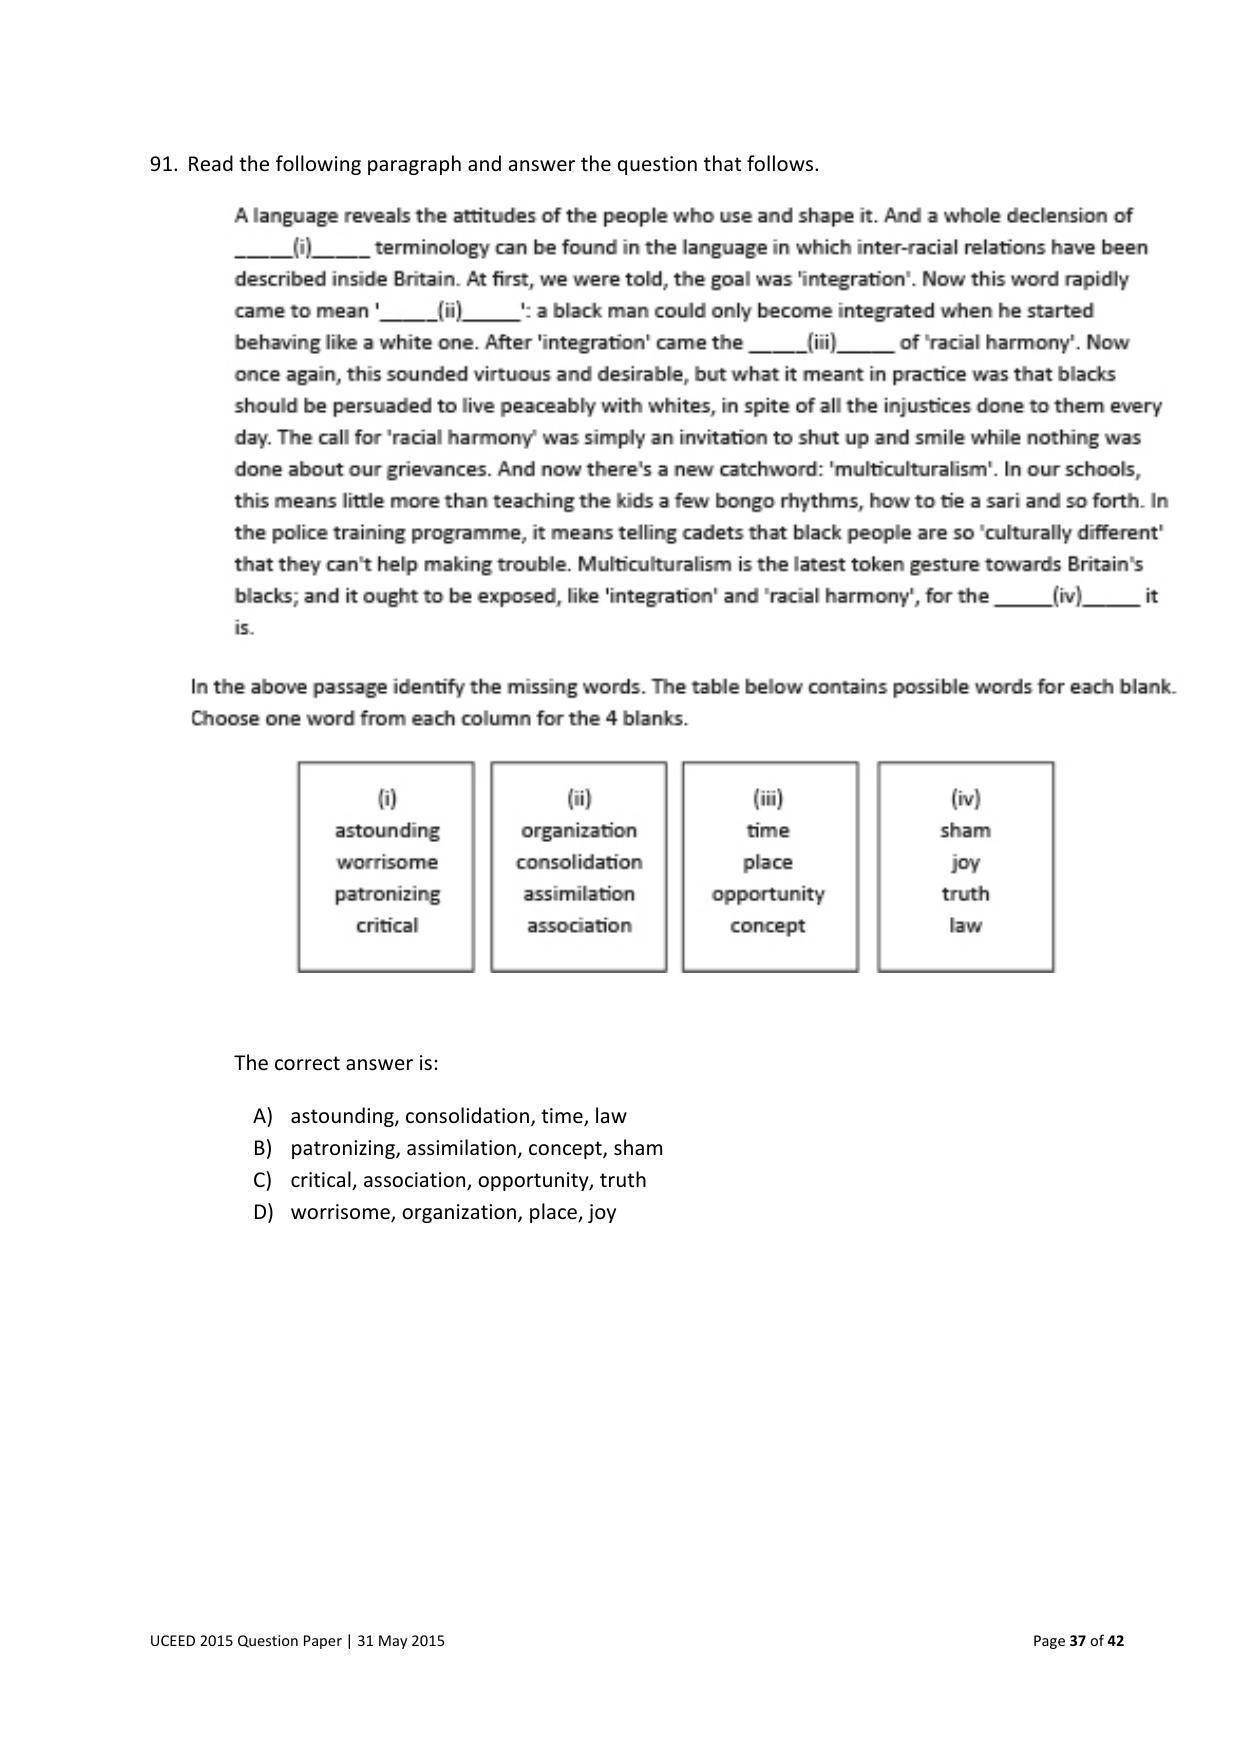 UCEED 2015 Question Paper - Page 37